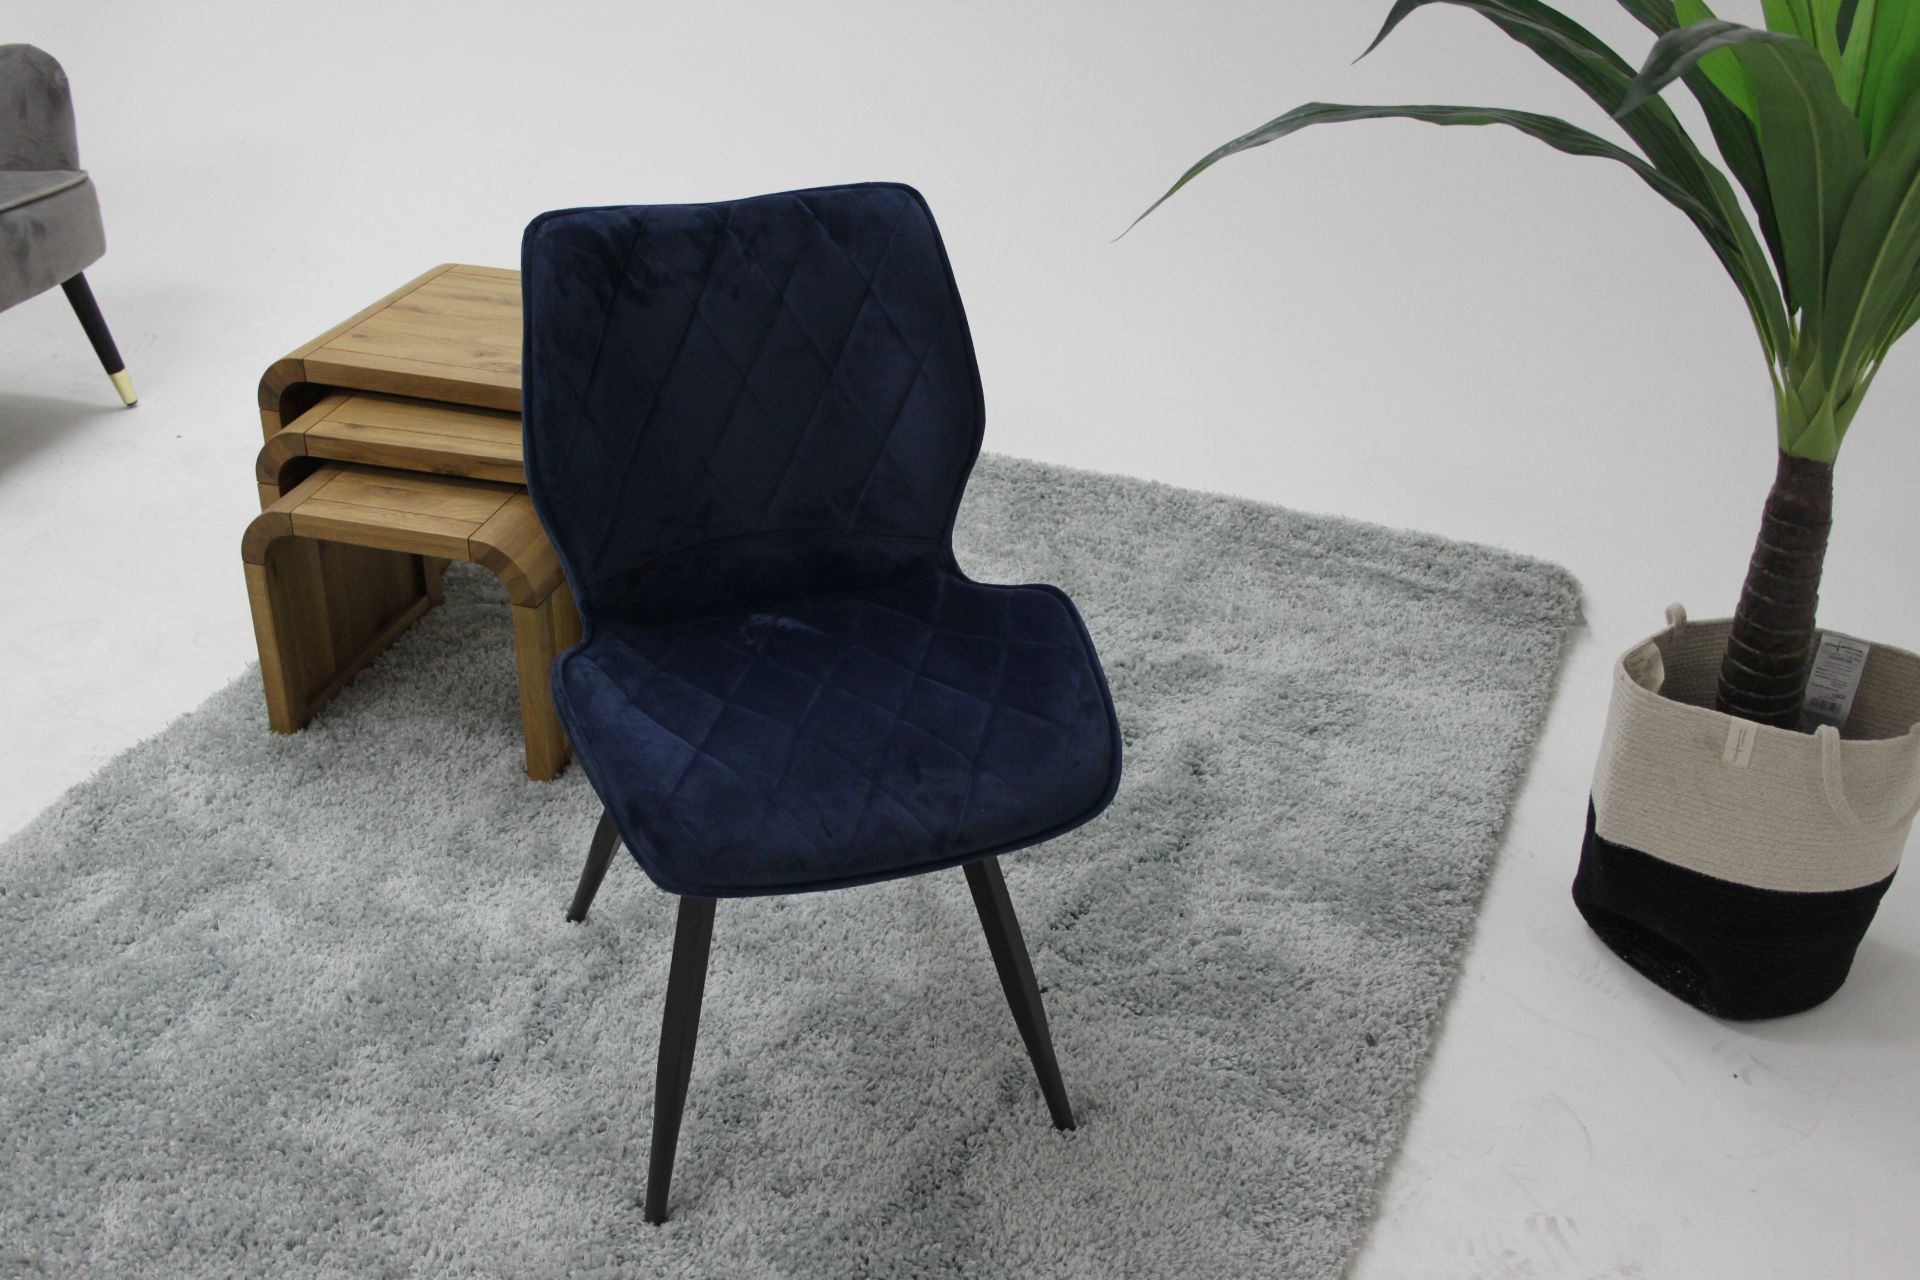 Alfa Diamond Dining Chair Blue Diamond Quilted Upholstery Gives A Luxury Finish To These Stylish